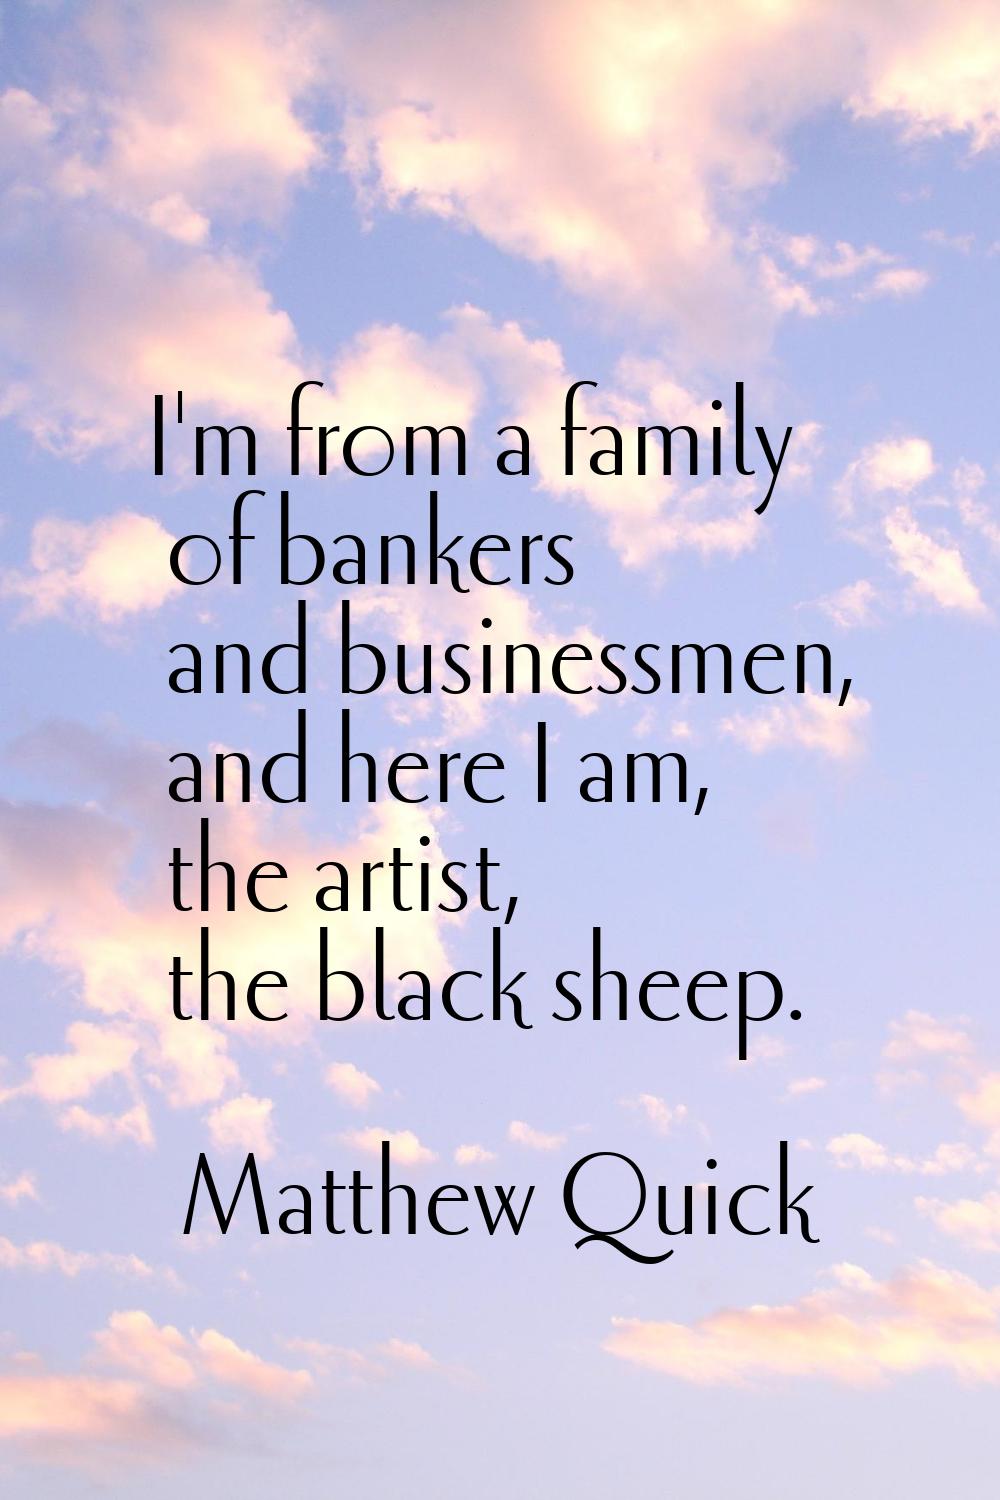 I'm from a family of bankers and businessmen, and here I am, the artist, the black sheep.